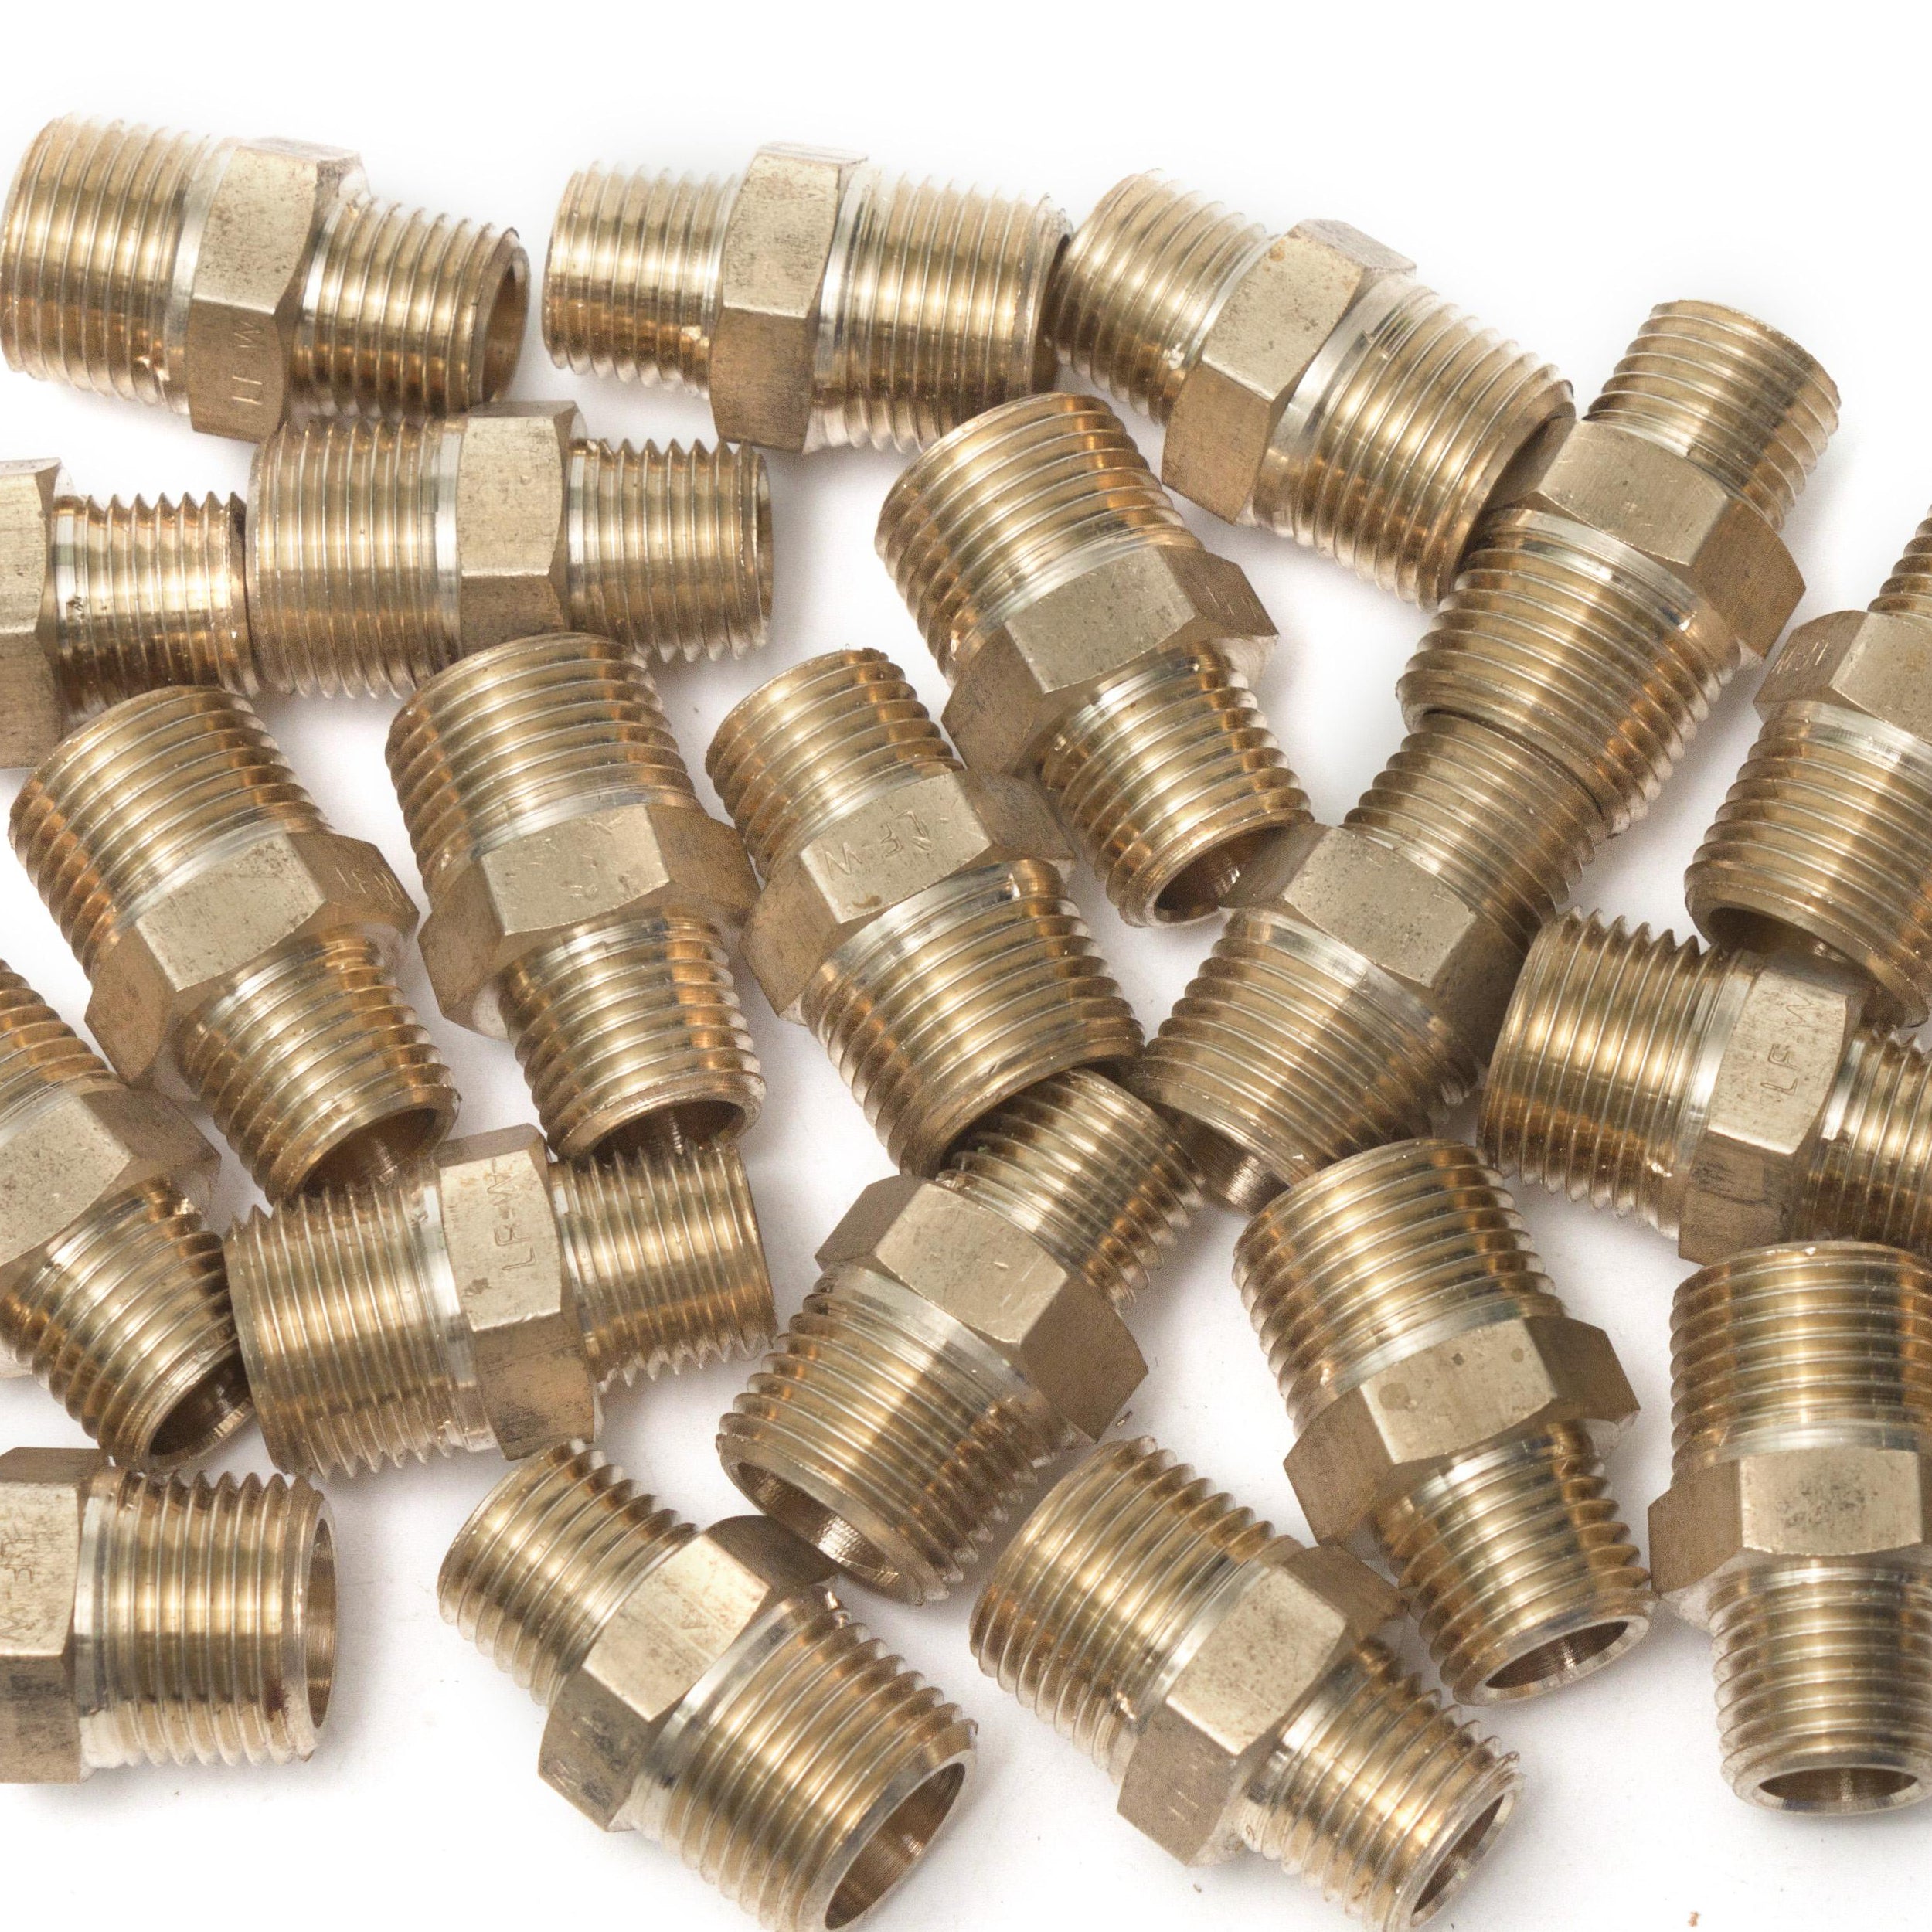 LTWFITTING Brass Pipe Hex Reducing Nipple Fitting 3/8-Inch x 1/4-Inch Male NPT(Pack of 25)